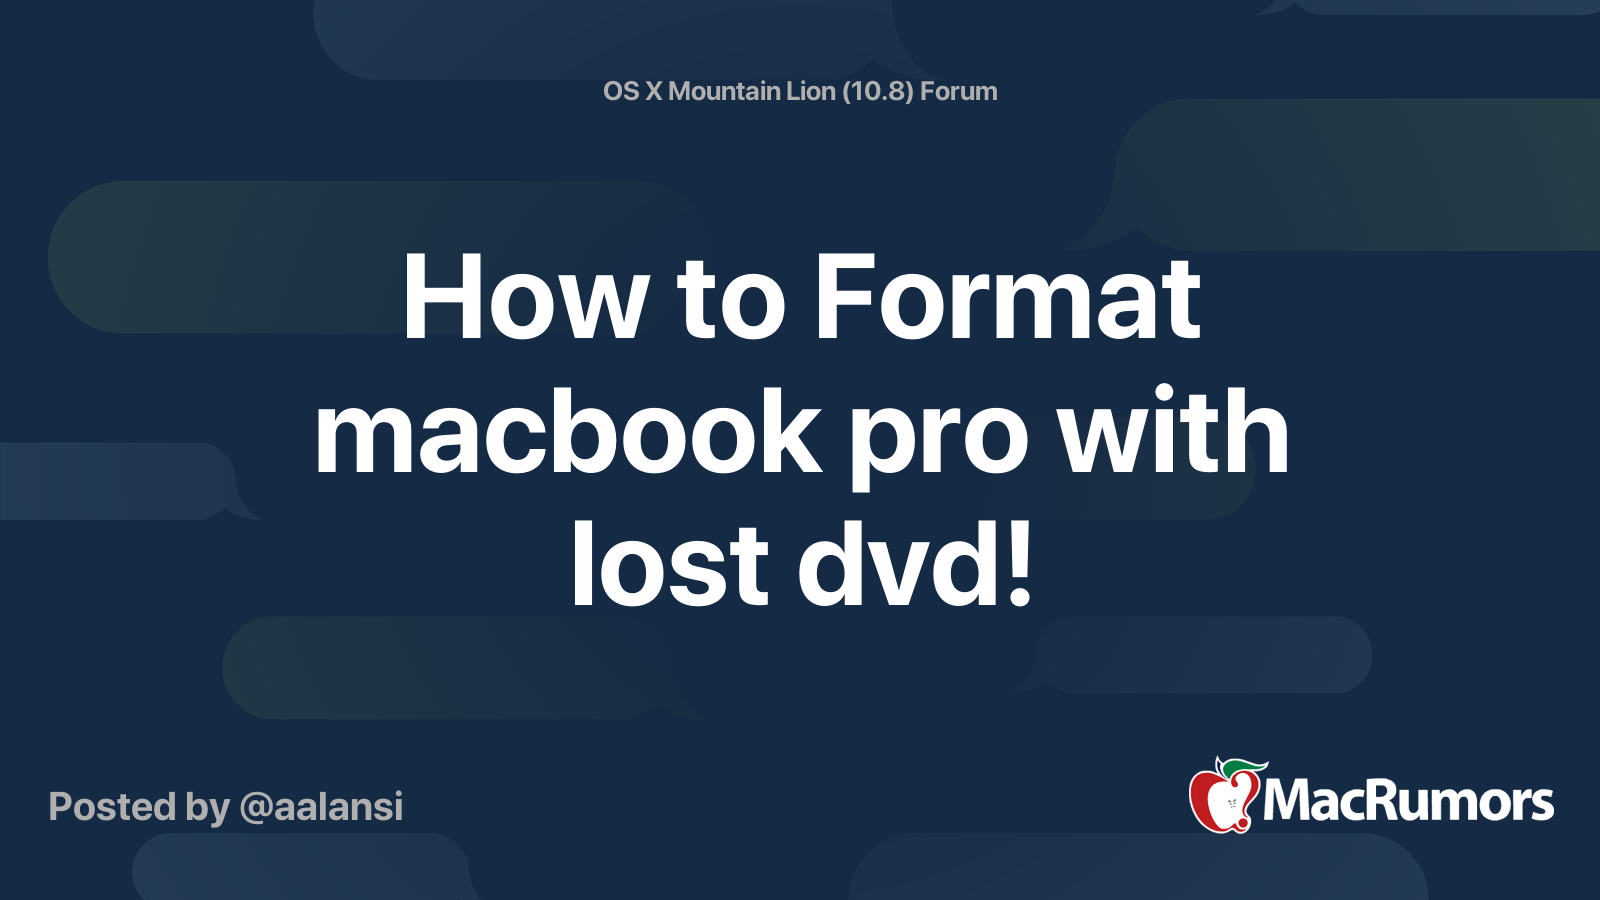 how-to-format-macbook-pro-with-lost-dvd-macrumors-forums